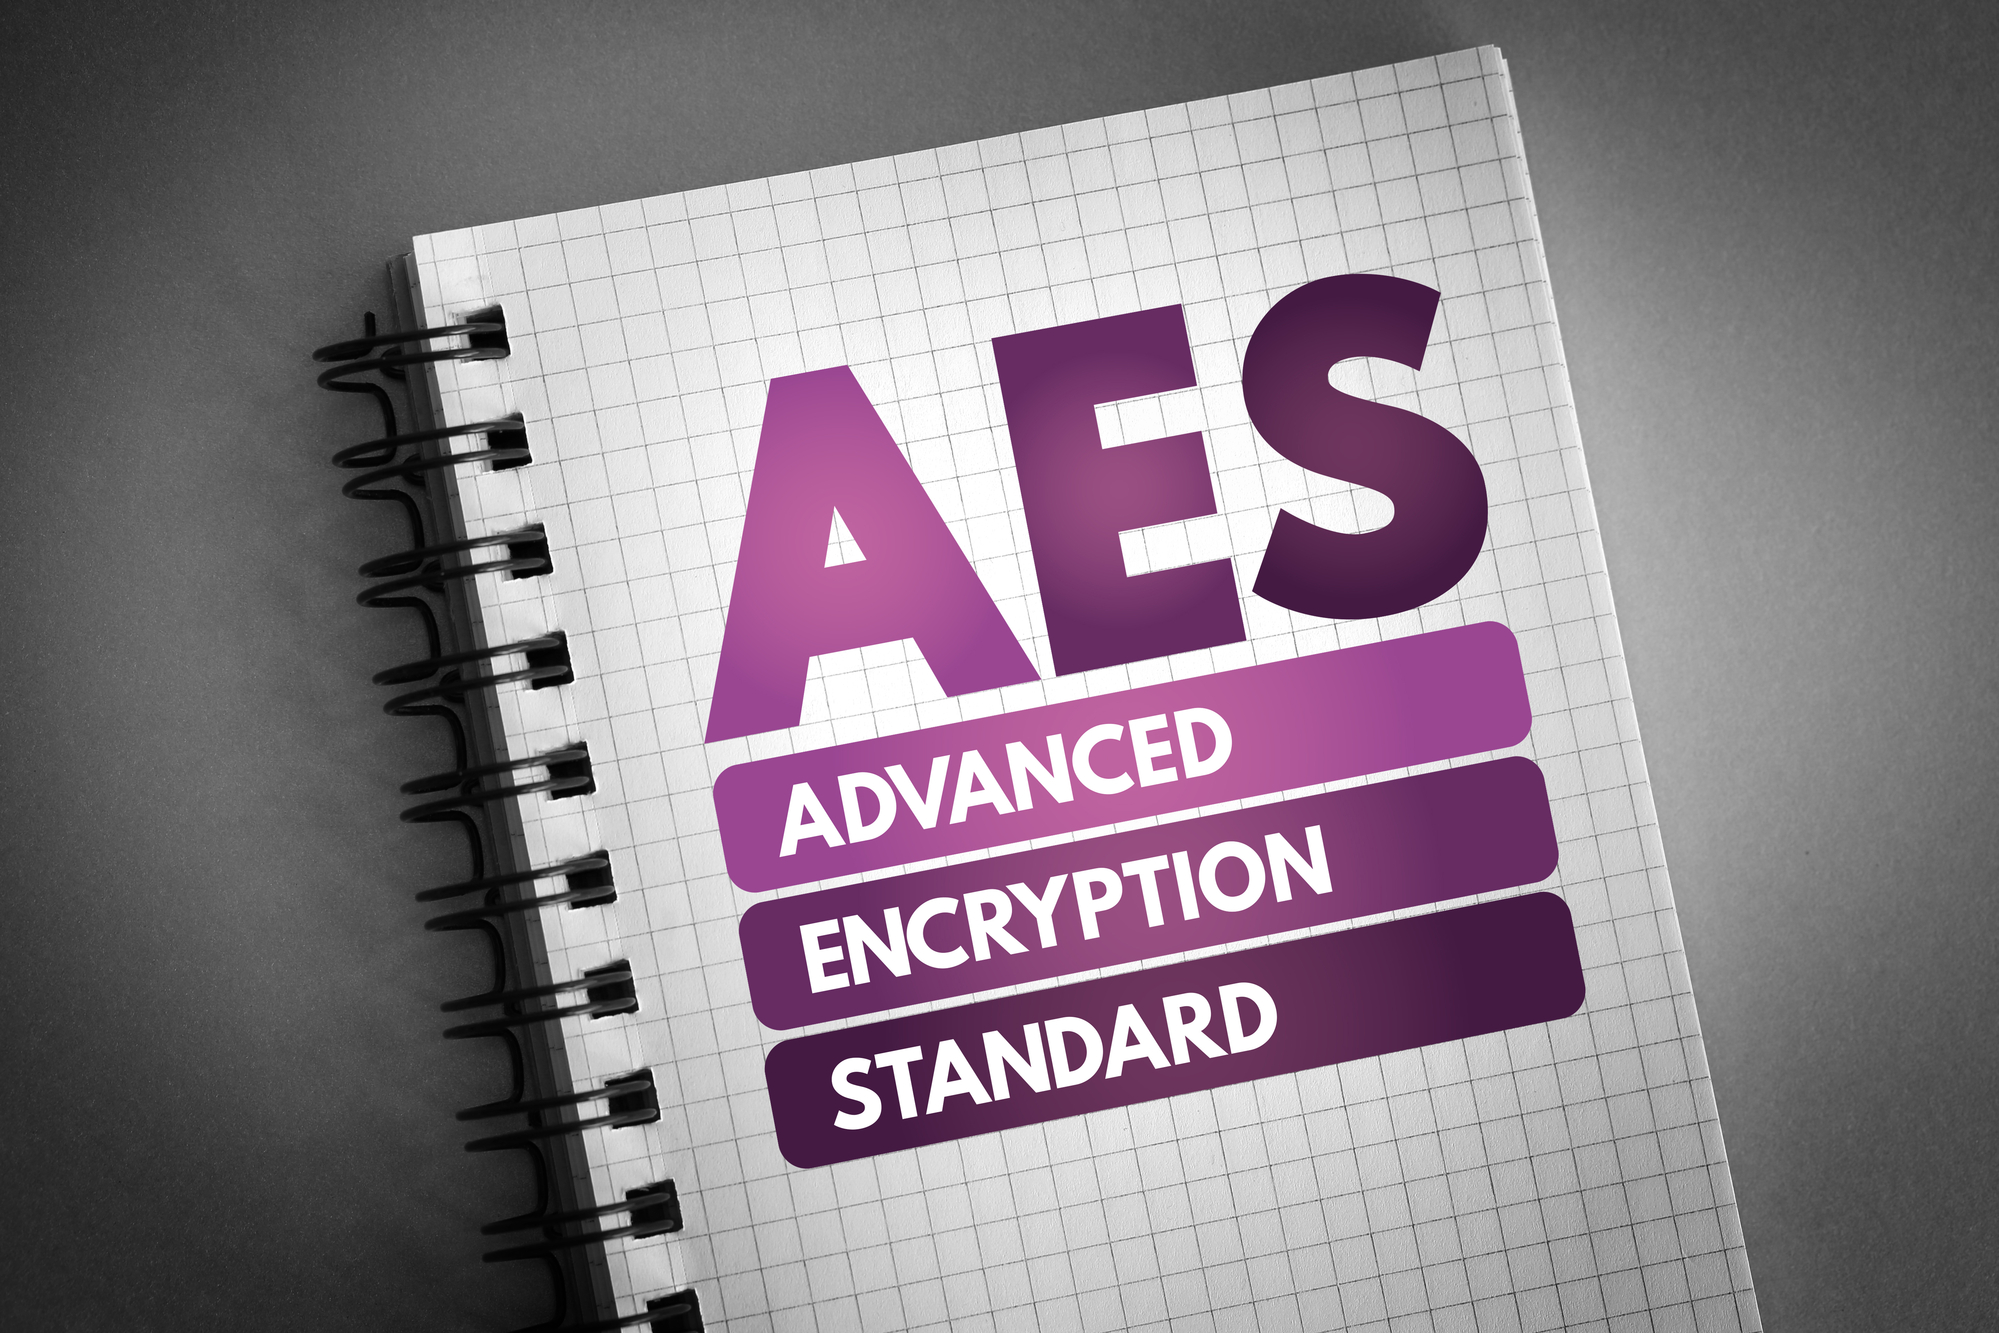 A notebook with the words "AES-256 Encryption Advanced Encryption Standard" on it.